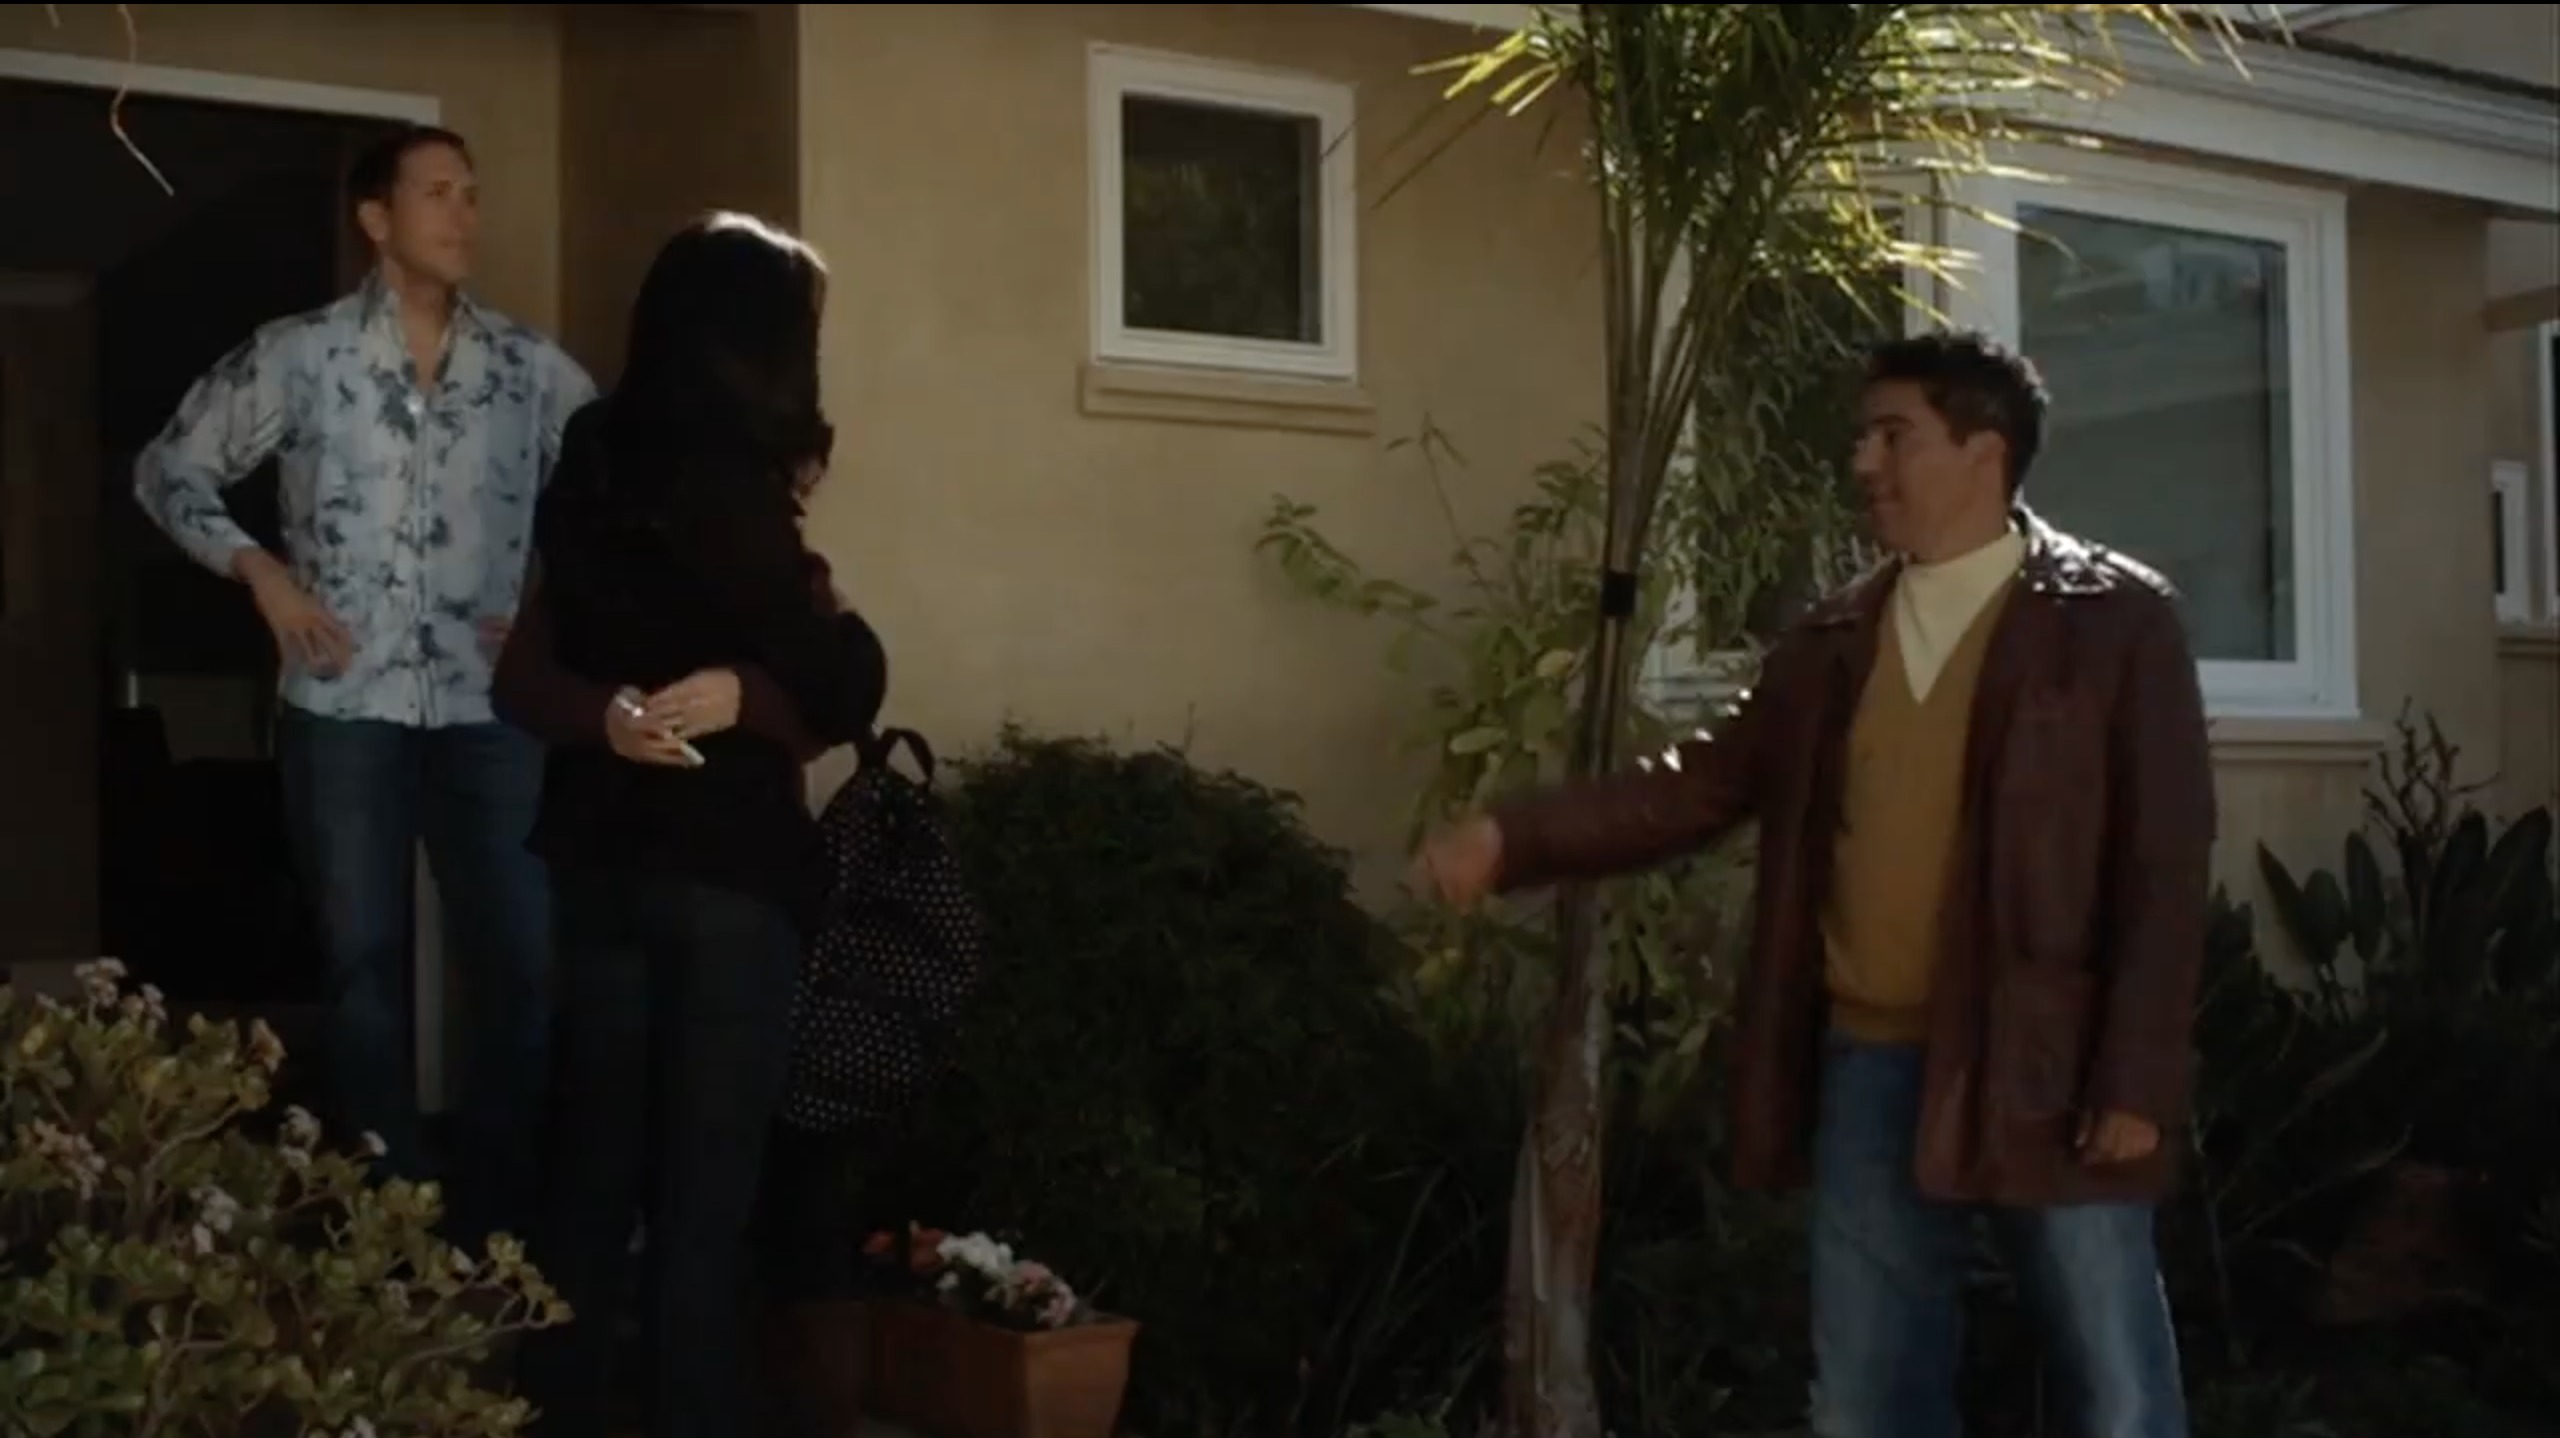 Dwight Turner as Theophelies, Kathrine Narducci as Cynthia, and Nicholas Turturro as Gianni de Carlo in The Deported (2009)